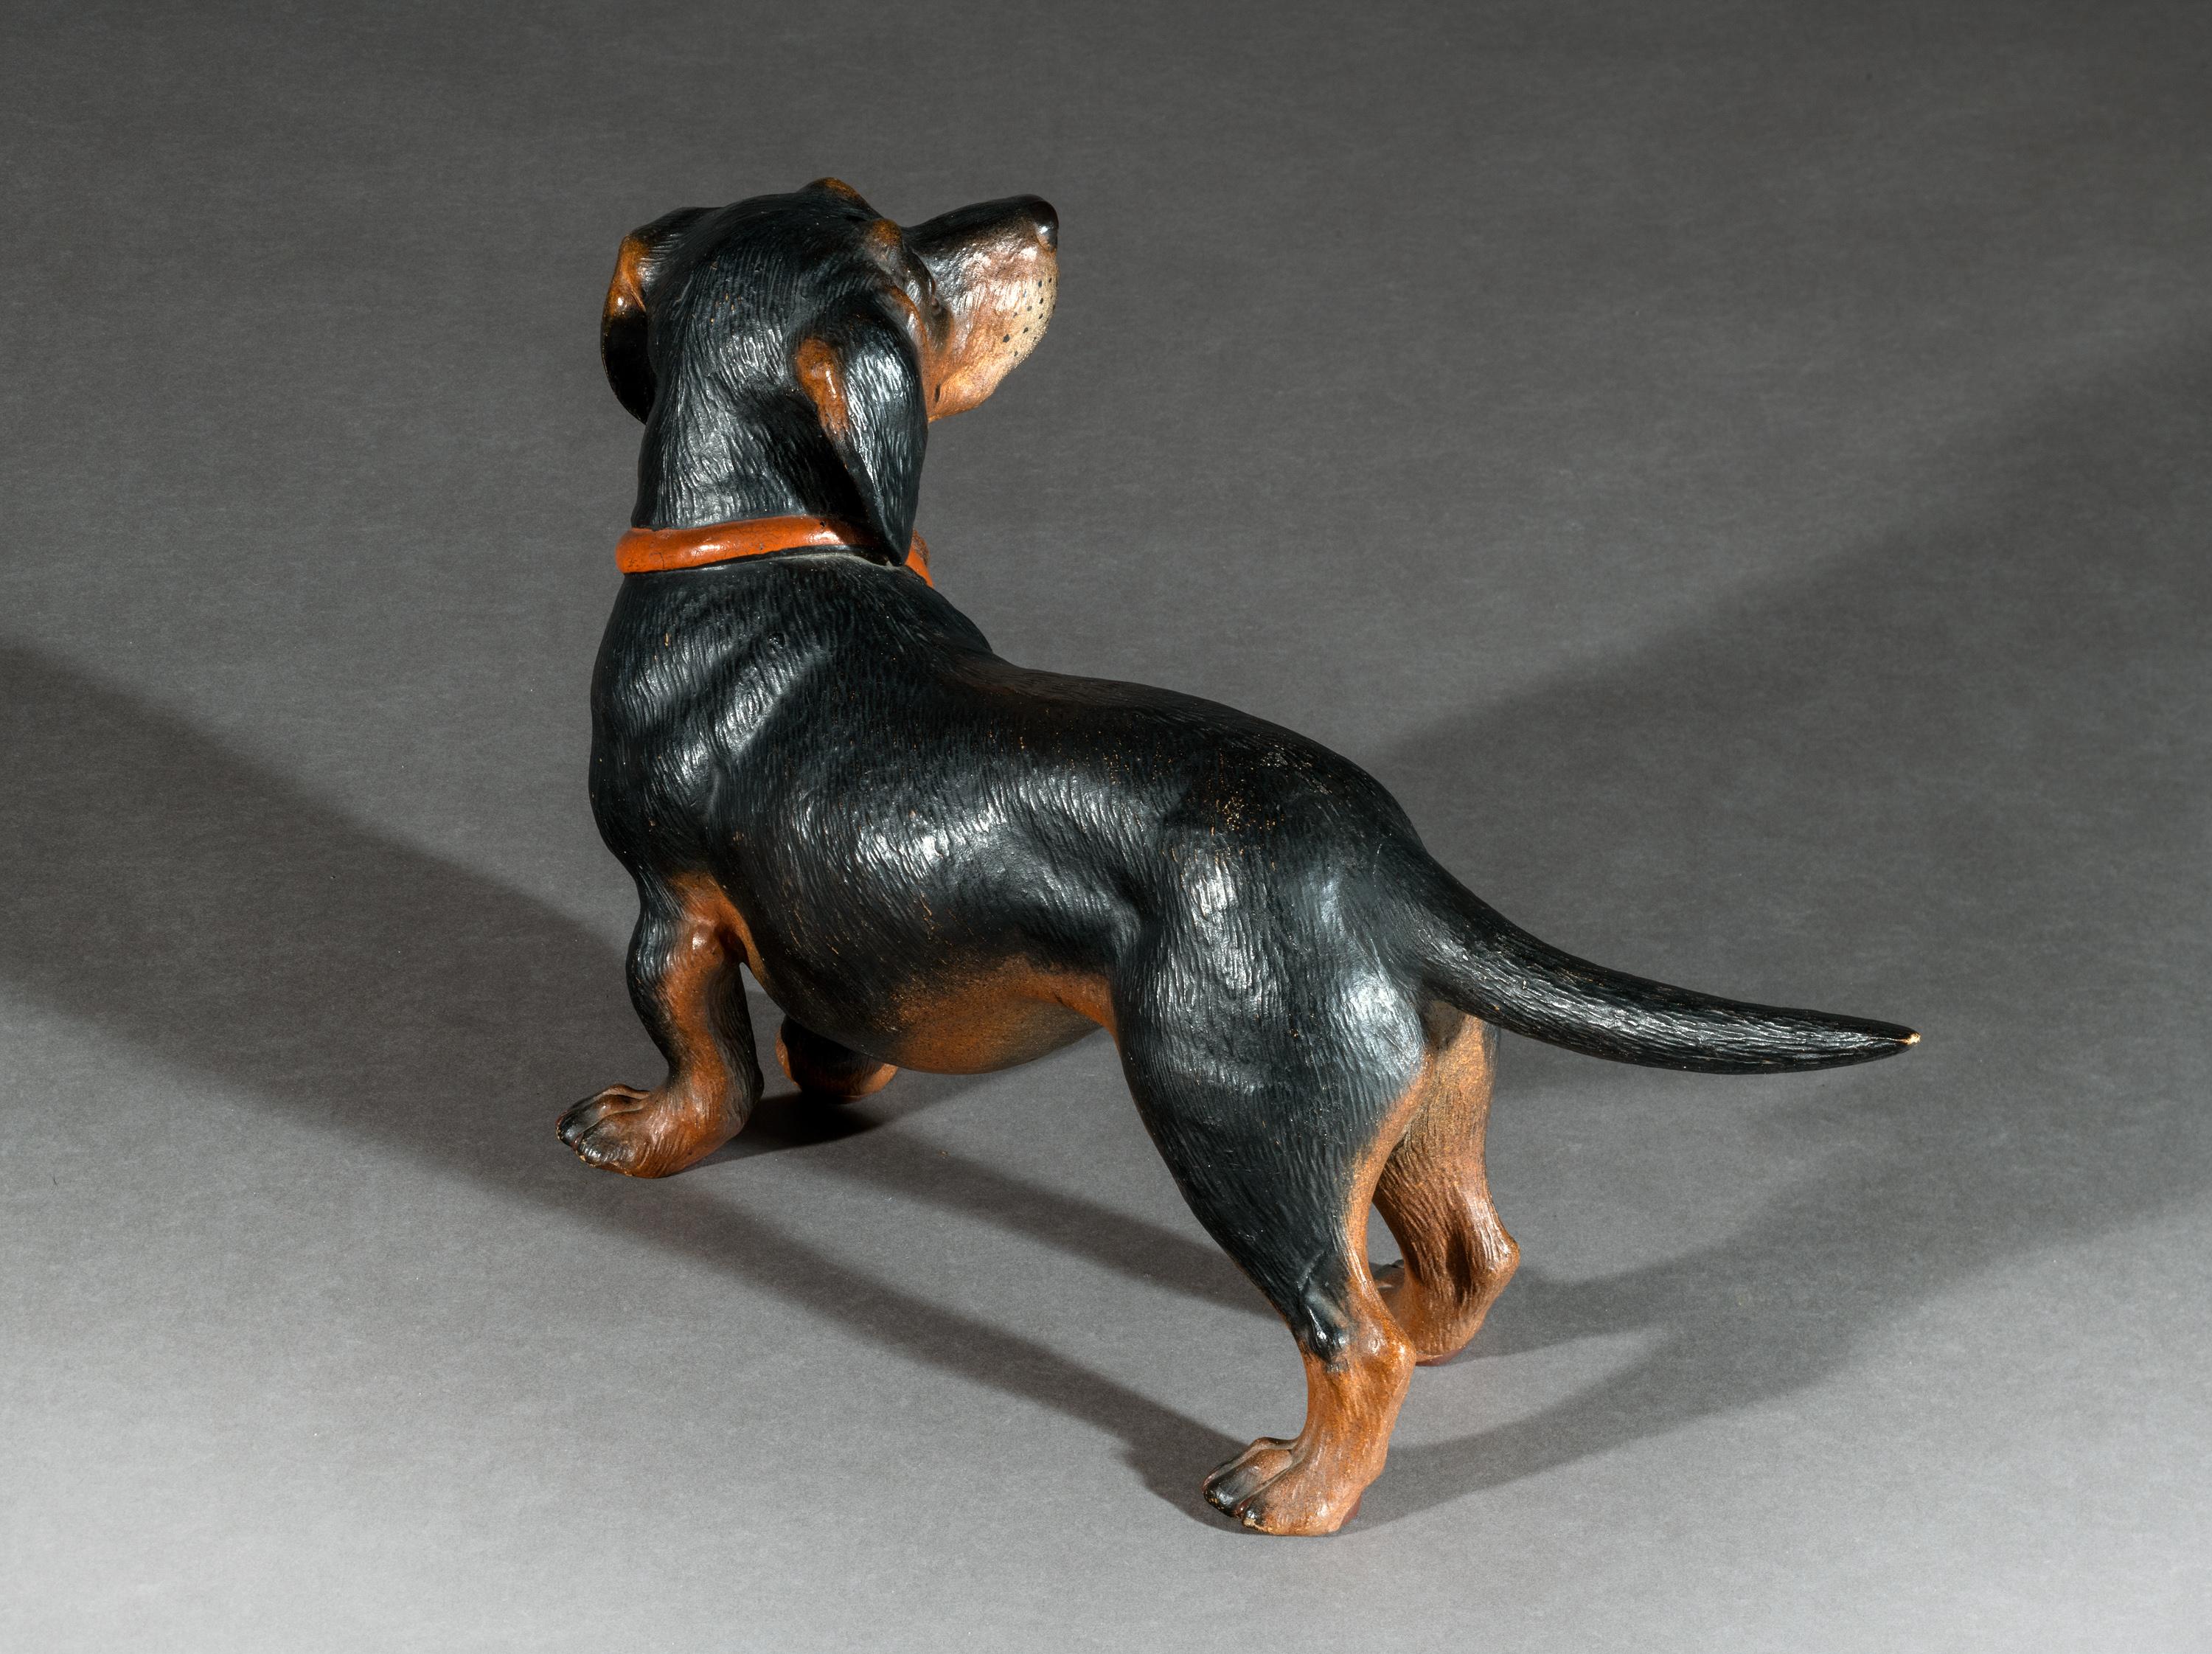 The terracotta figure of a Dachshund hound is near life size. The Dachshund has the original paint and finish and the terracotta is in excellent condition.

On a personal note the hound is very well behaved and does not need walking!